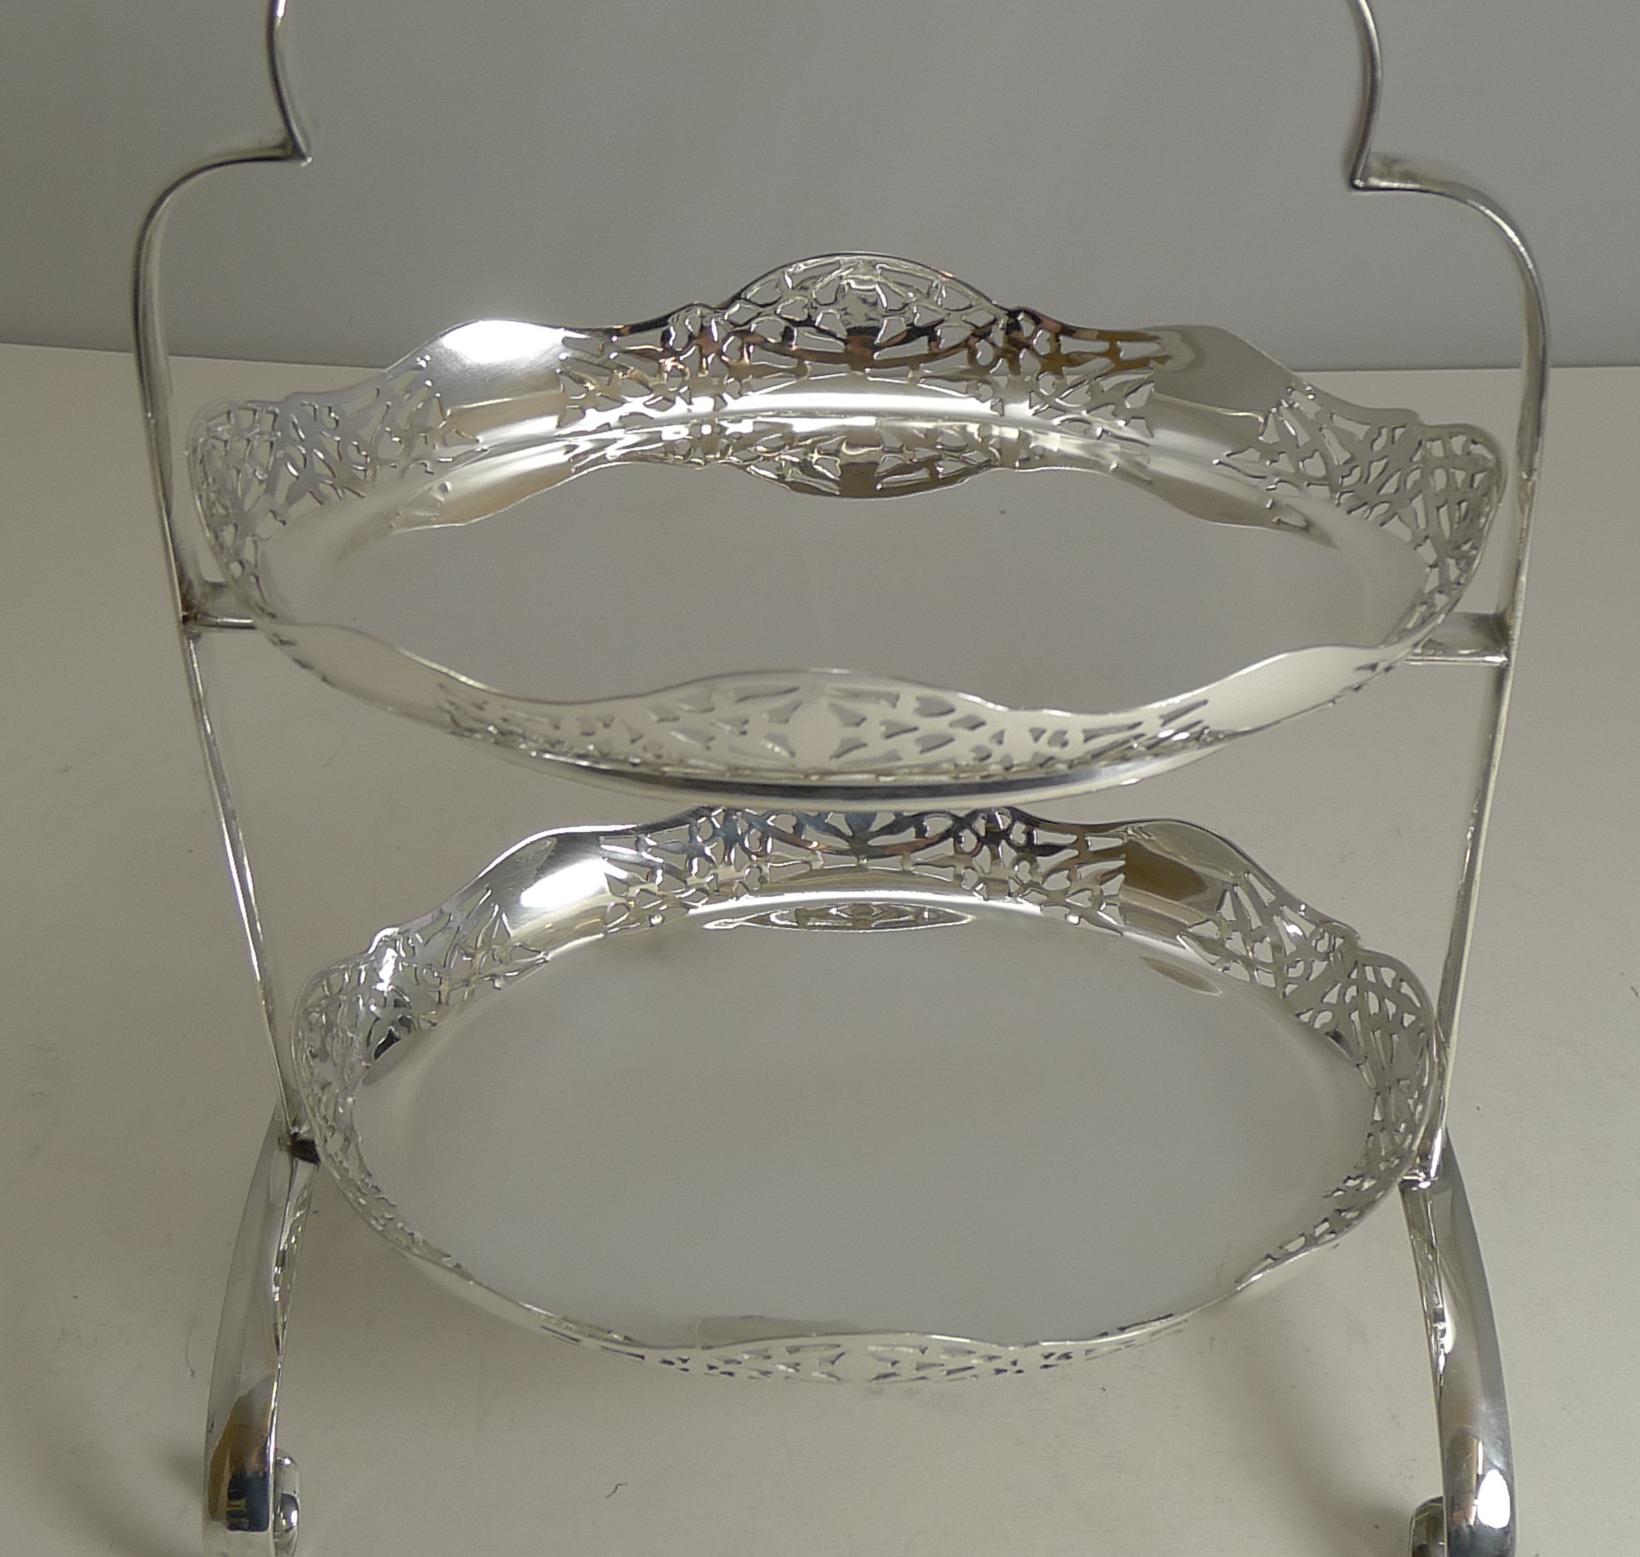 A lovely petite two-tier cake stand, perfect for serving a multitude of treats from cup cakes to hors d'oeuvres to chocolates to cocktail snacks.

Made from English silver plate, the frame is fully marked by the silversmith, Thomas White of